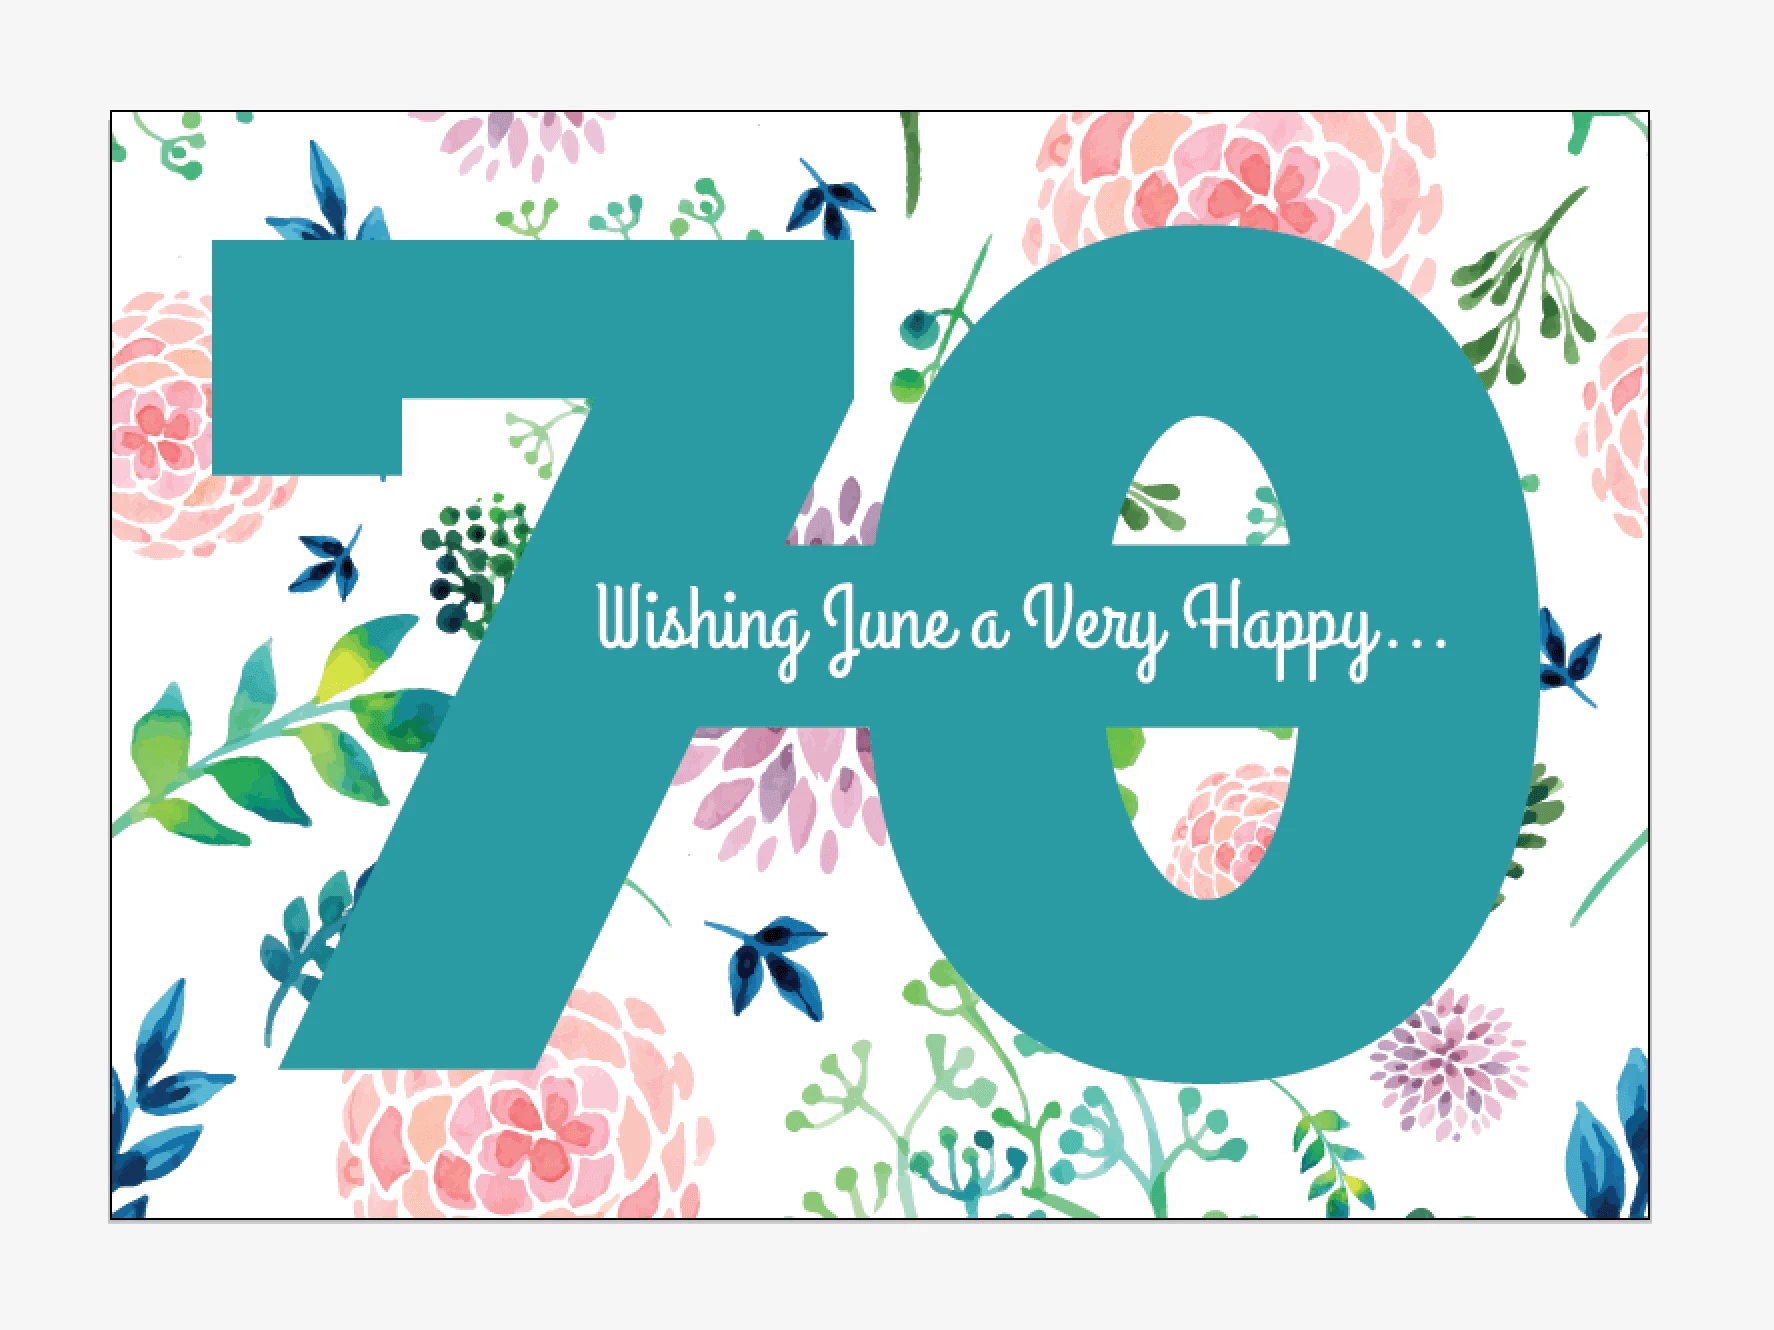 Personalized floral birthday postcards printable for 60th, 65th, 75th, 70th, 80th, 50th, 40th, 90th, 100th birthday